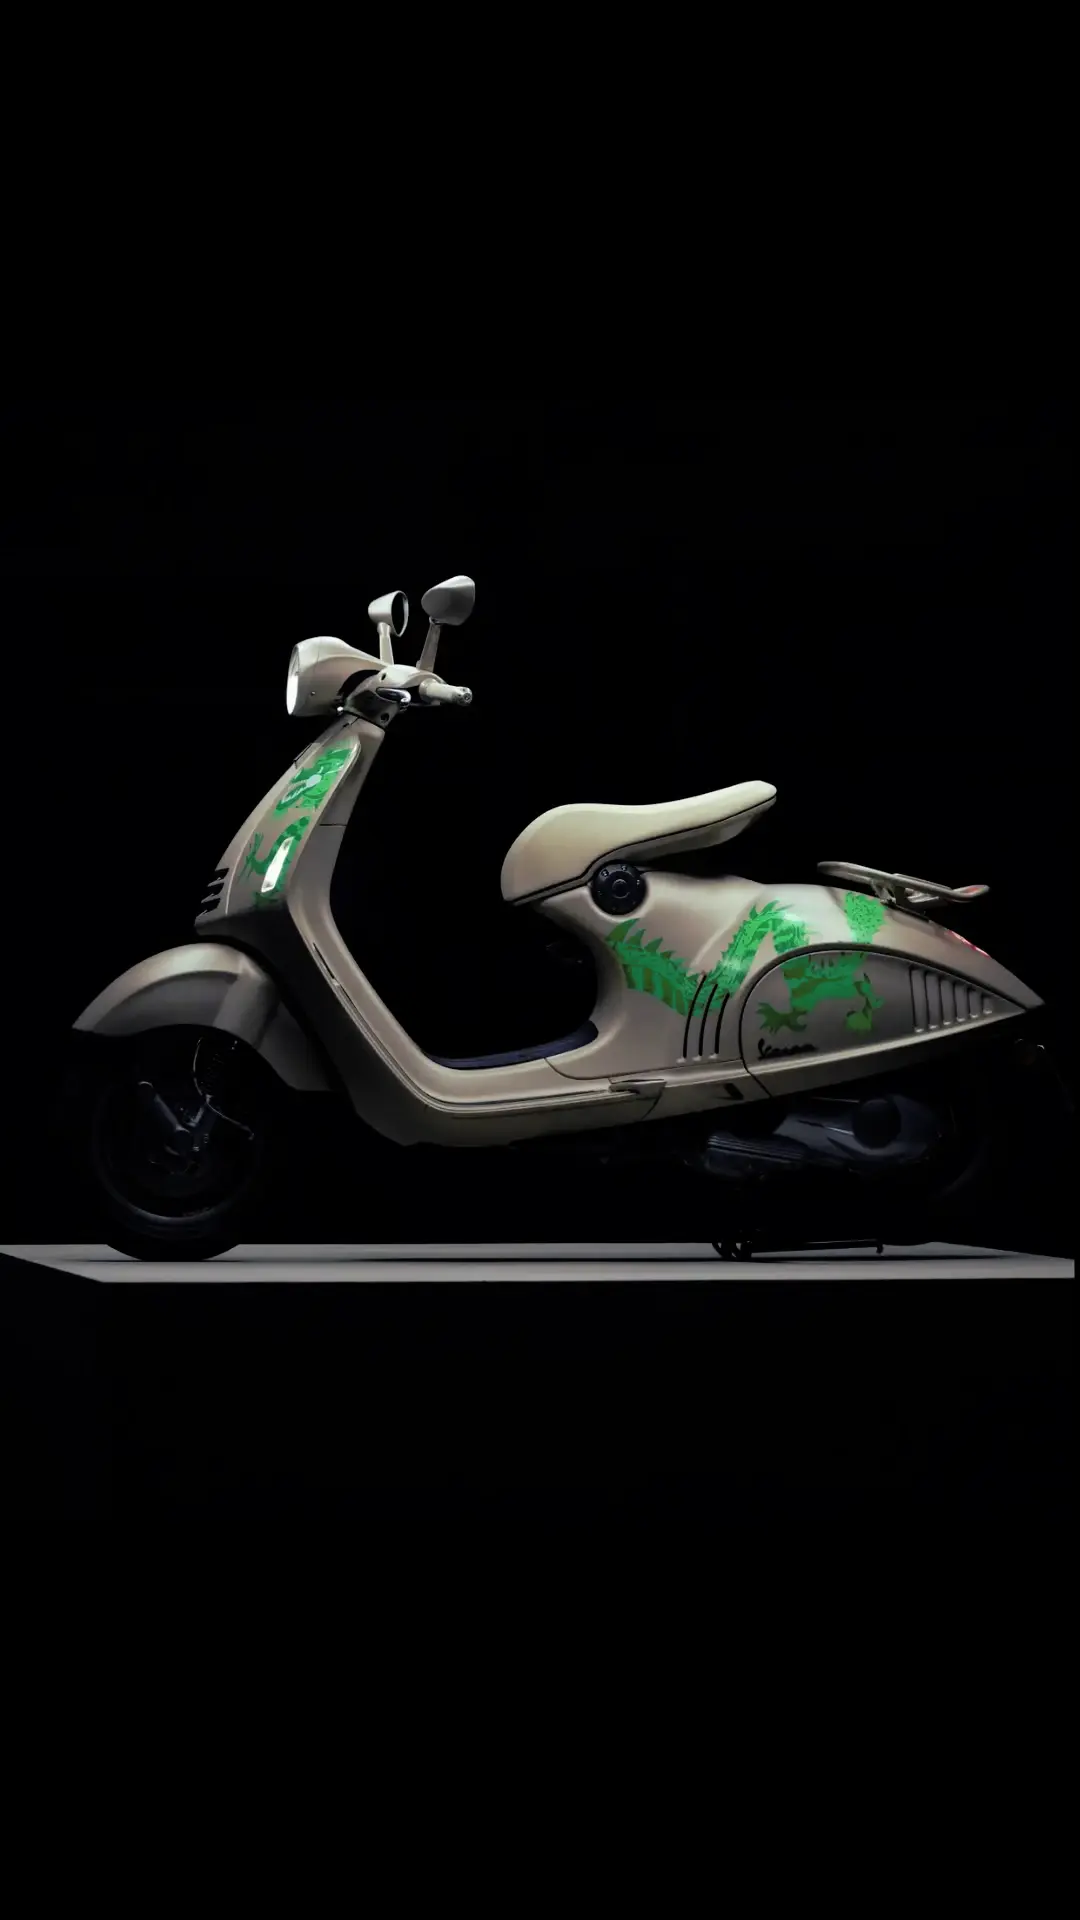 Vespa 946 Dragon: Celebrating Luxury and Tradition with Exclusive Design